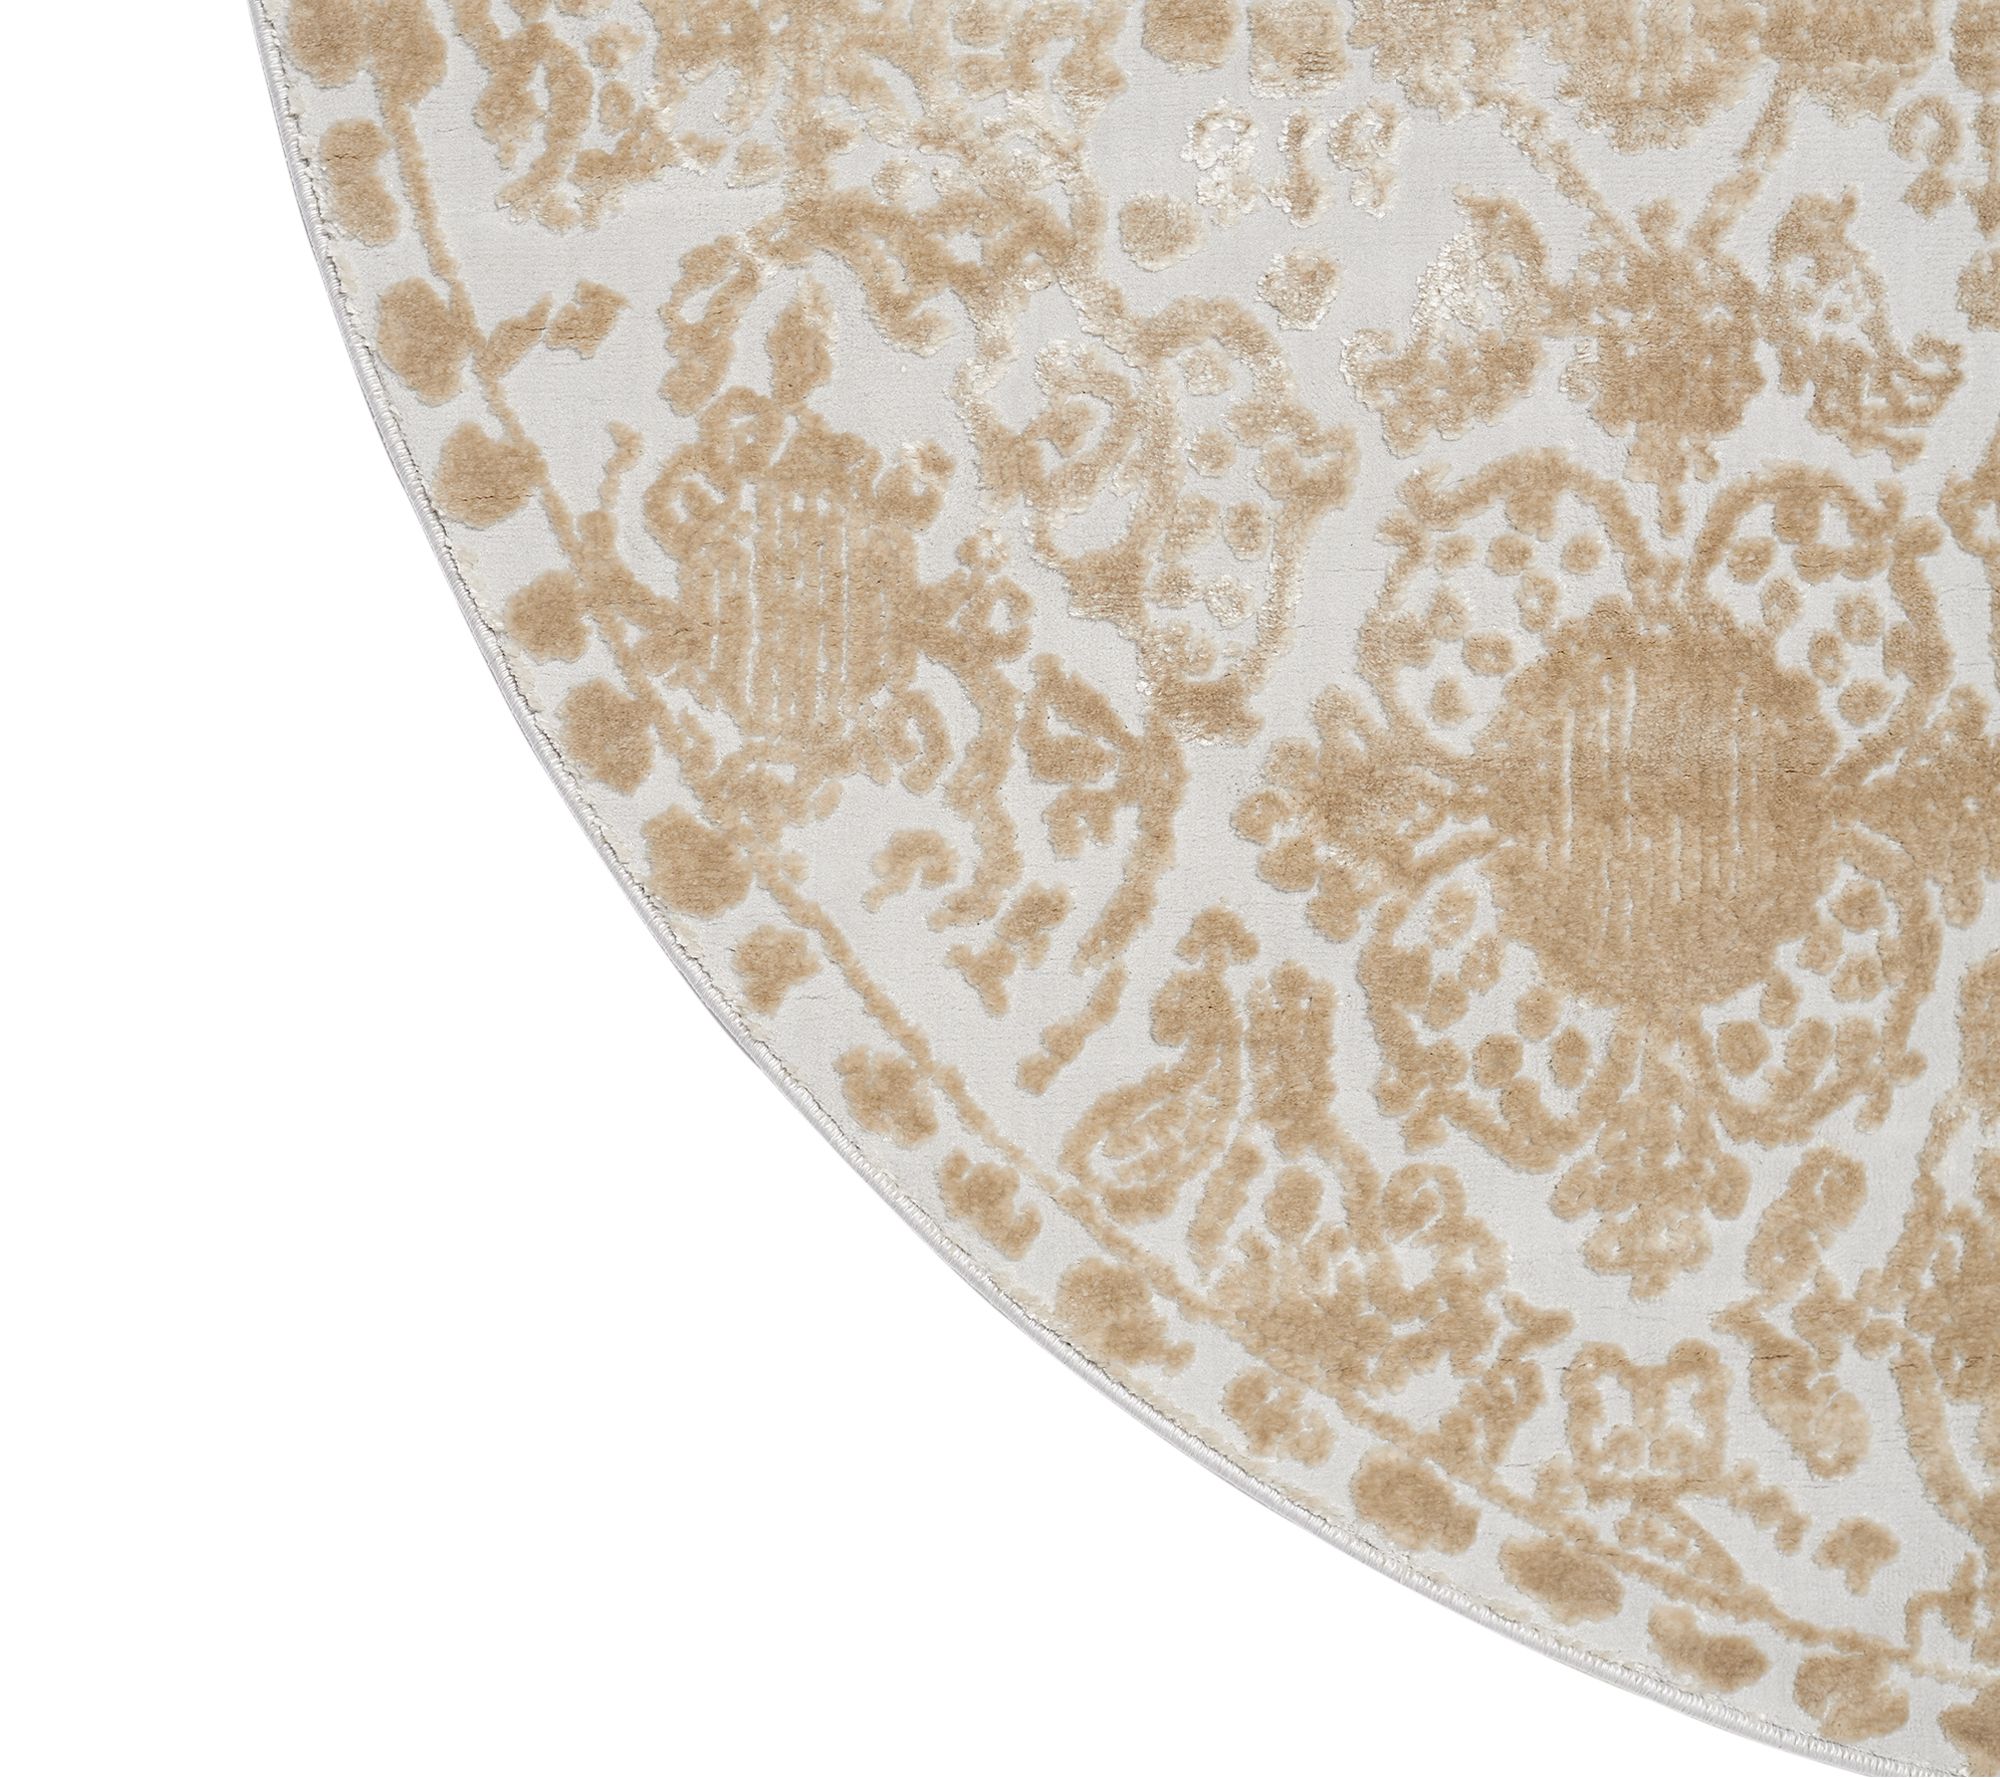 Home Decor 5'3" Round Elegant Opulence Round Rug Champagne Color Inspire Me 